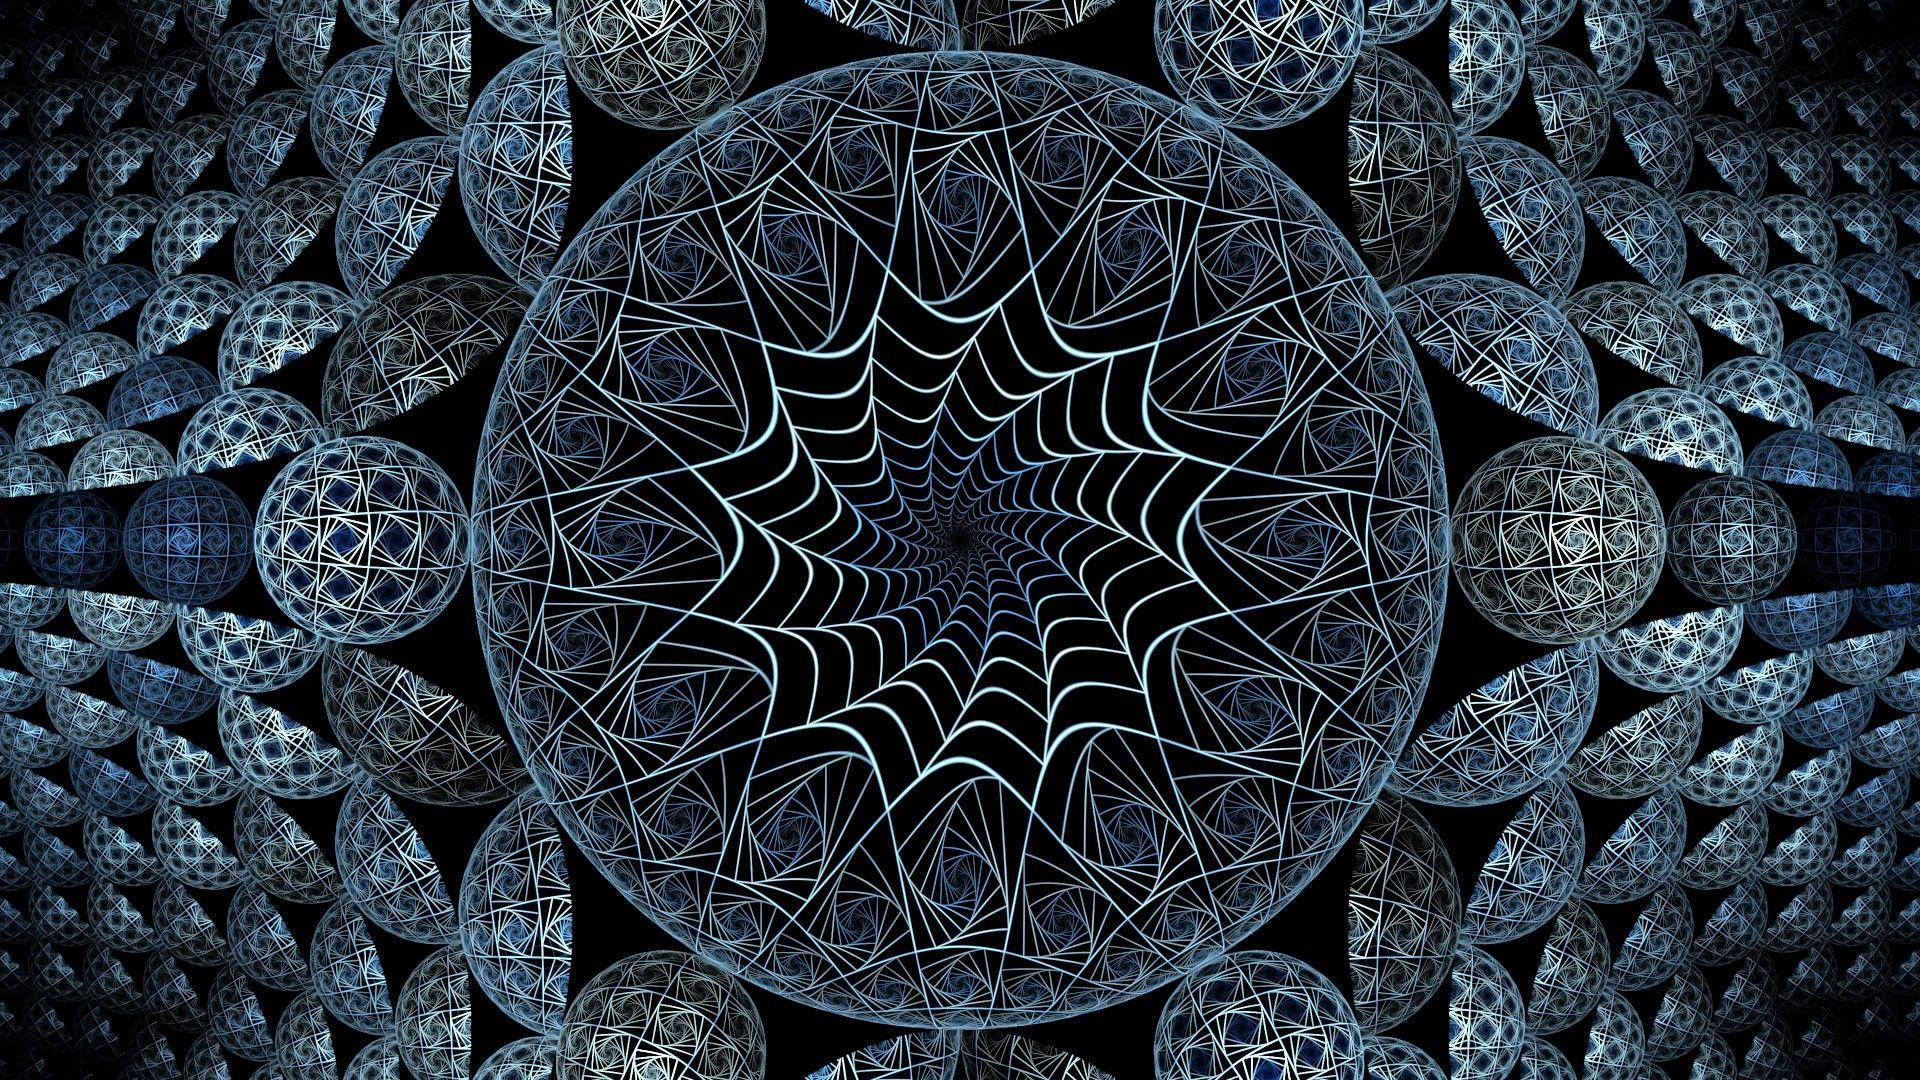 Abstract Web Fractal Graphic